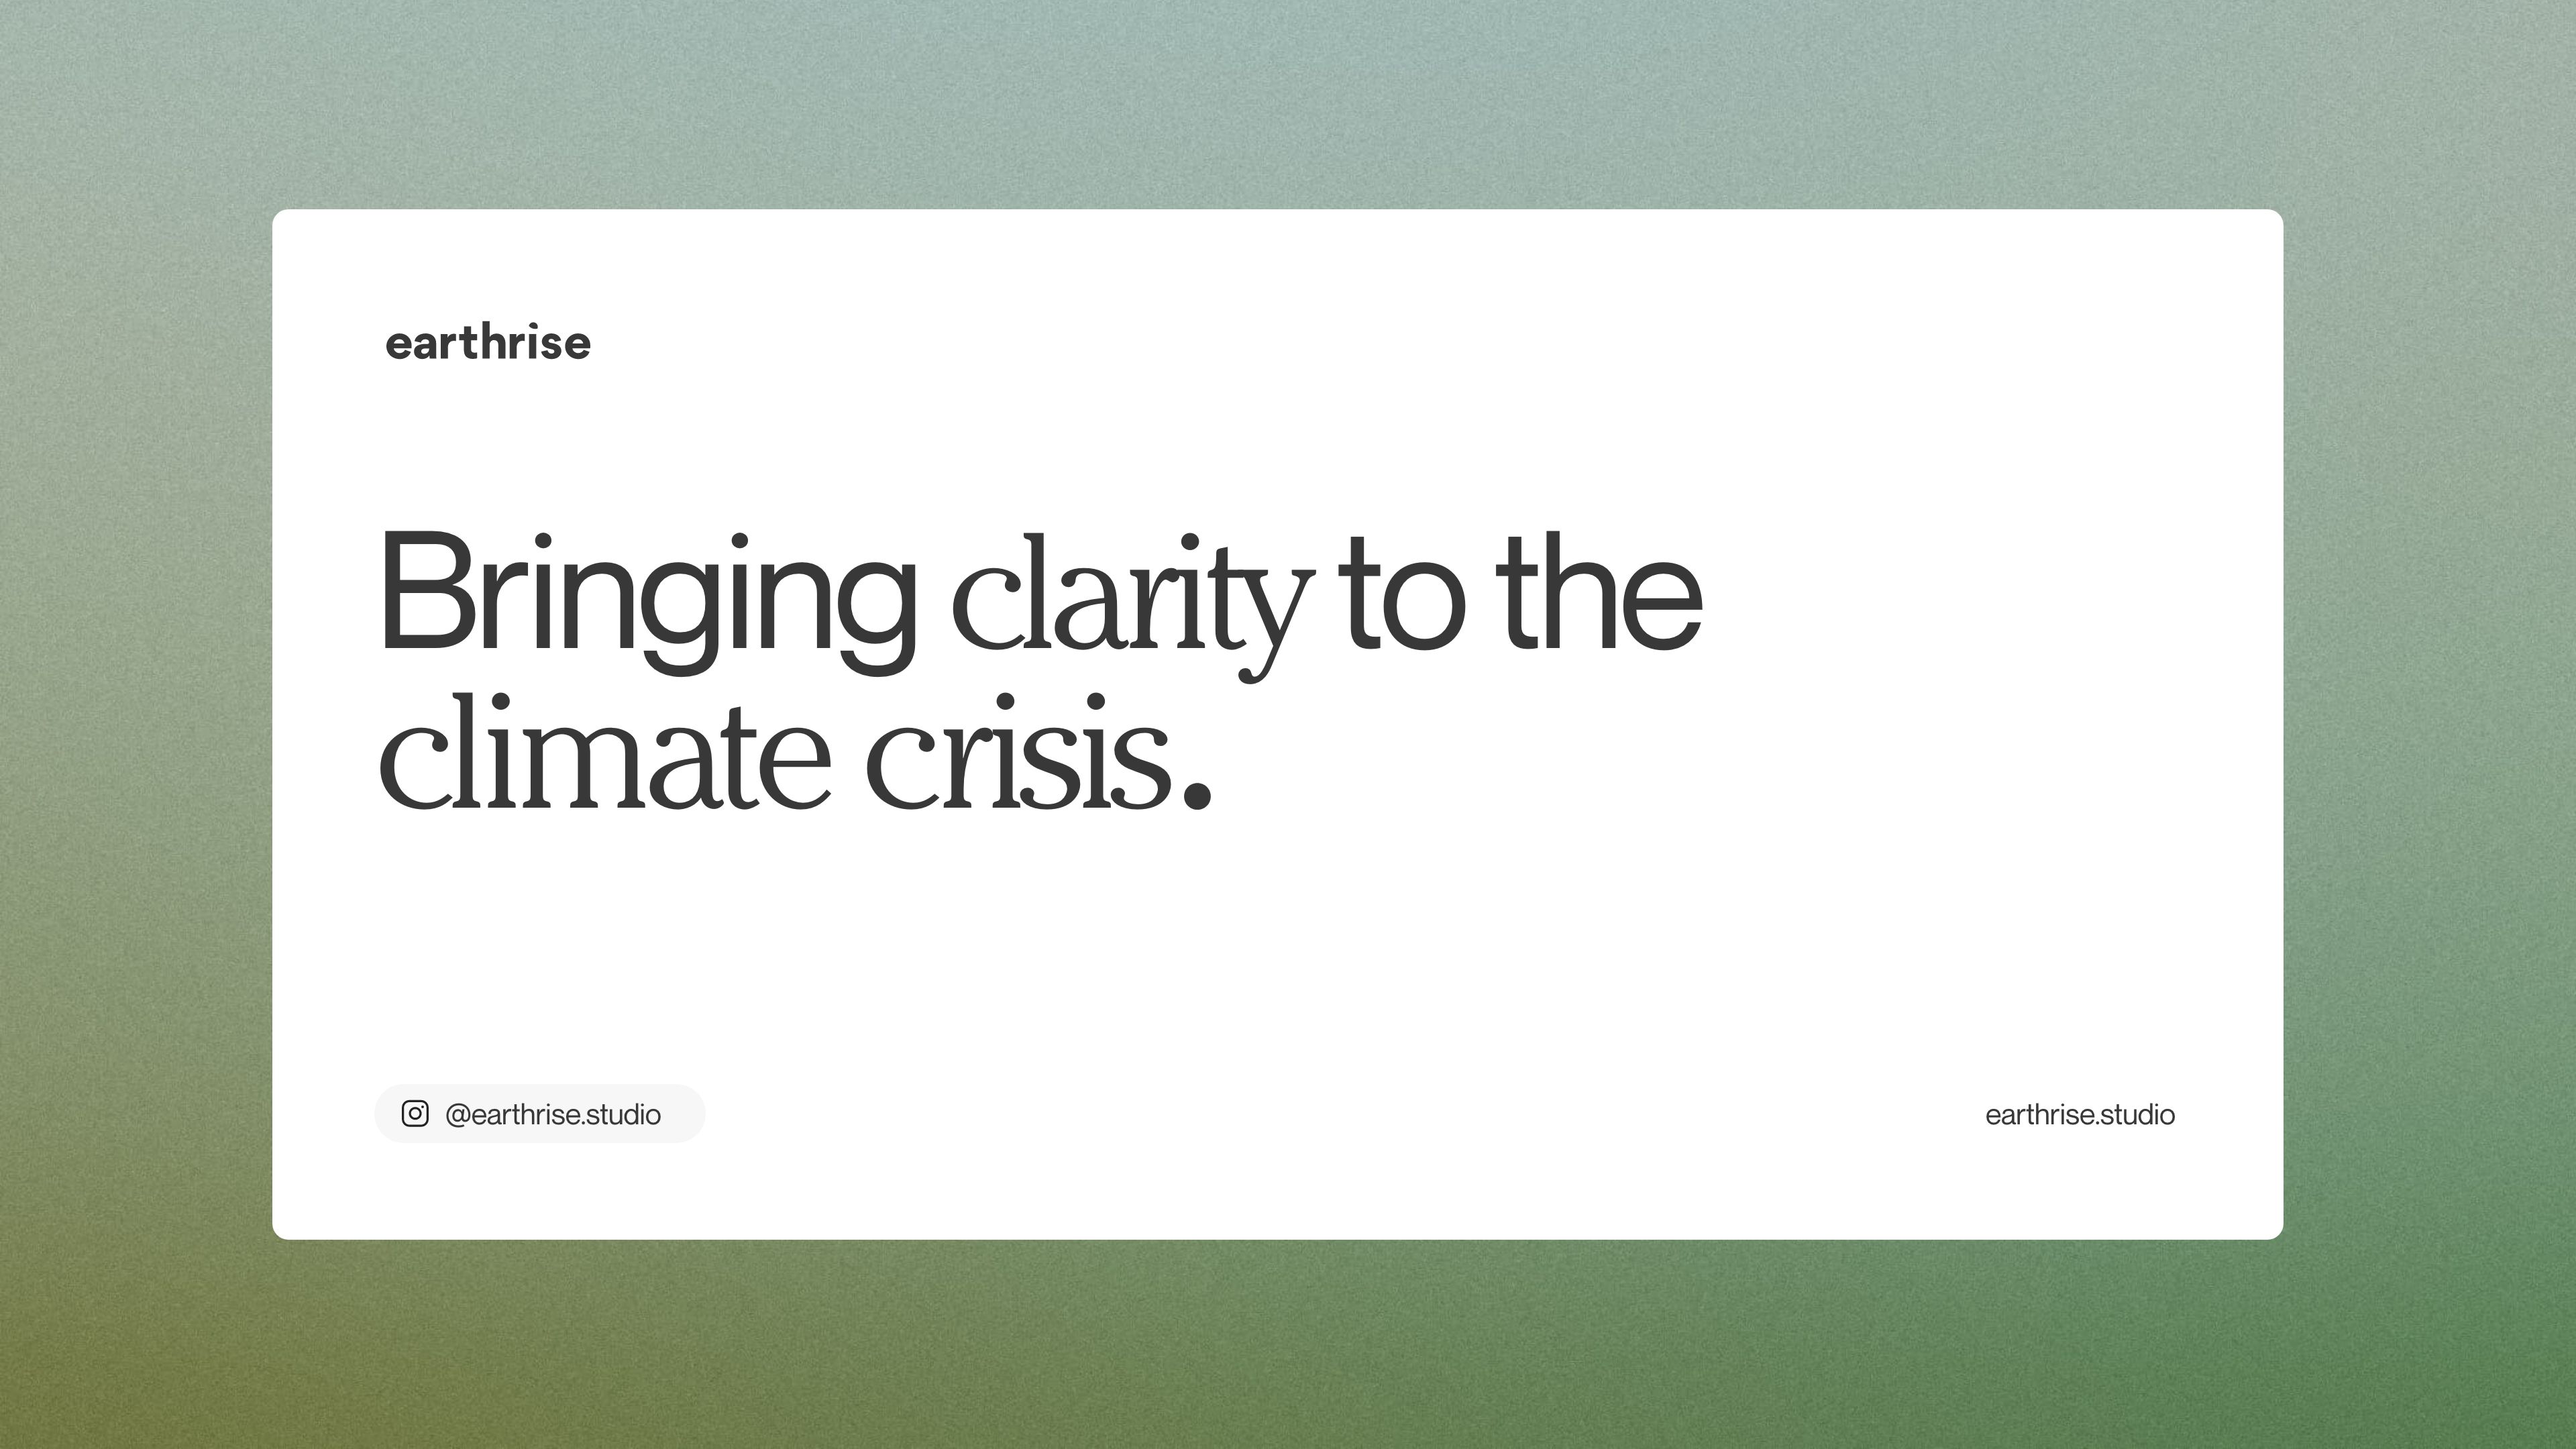 A branded card showing the earthrise message, "Bringing clarity to the climate crisis"